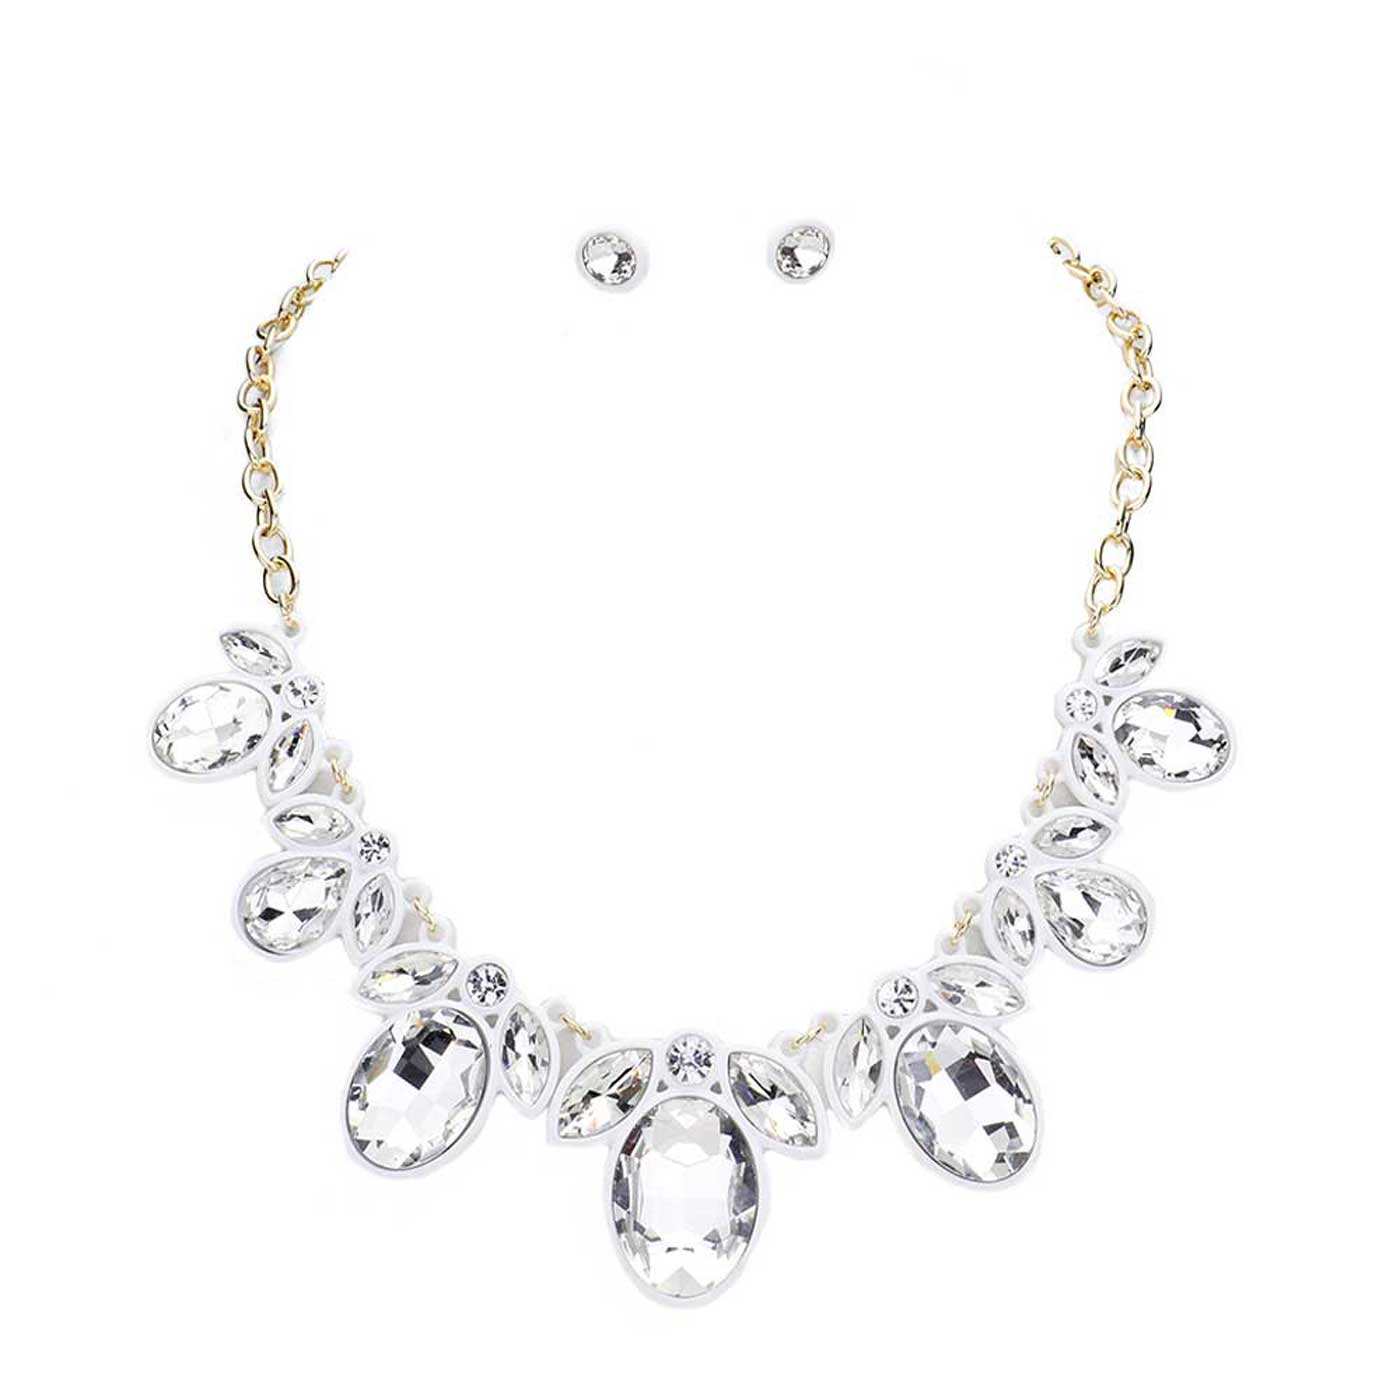 White Oval Marquise Glass Crystal Collar Necklace. These gorgeous Crystal pieces will show your class in any special occasion. The elegance of these Crystal goes unmatched, great for wearing at a party! Perfect jewelry to enhance your look. Awesome gift for birthday, Anniversary, Valentine’s Day or any special occasion.